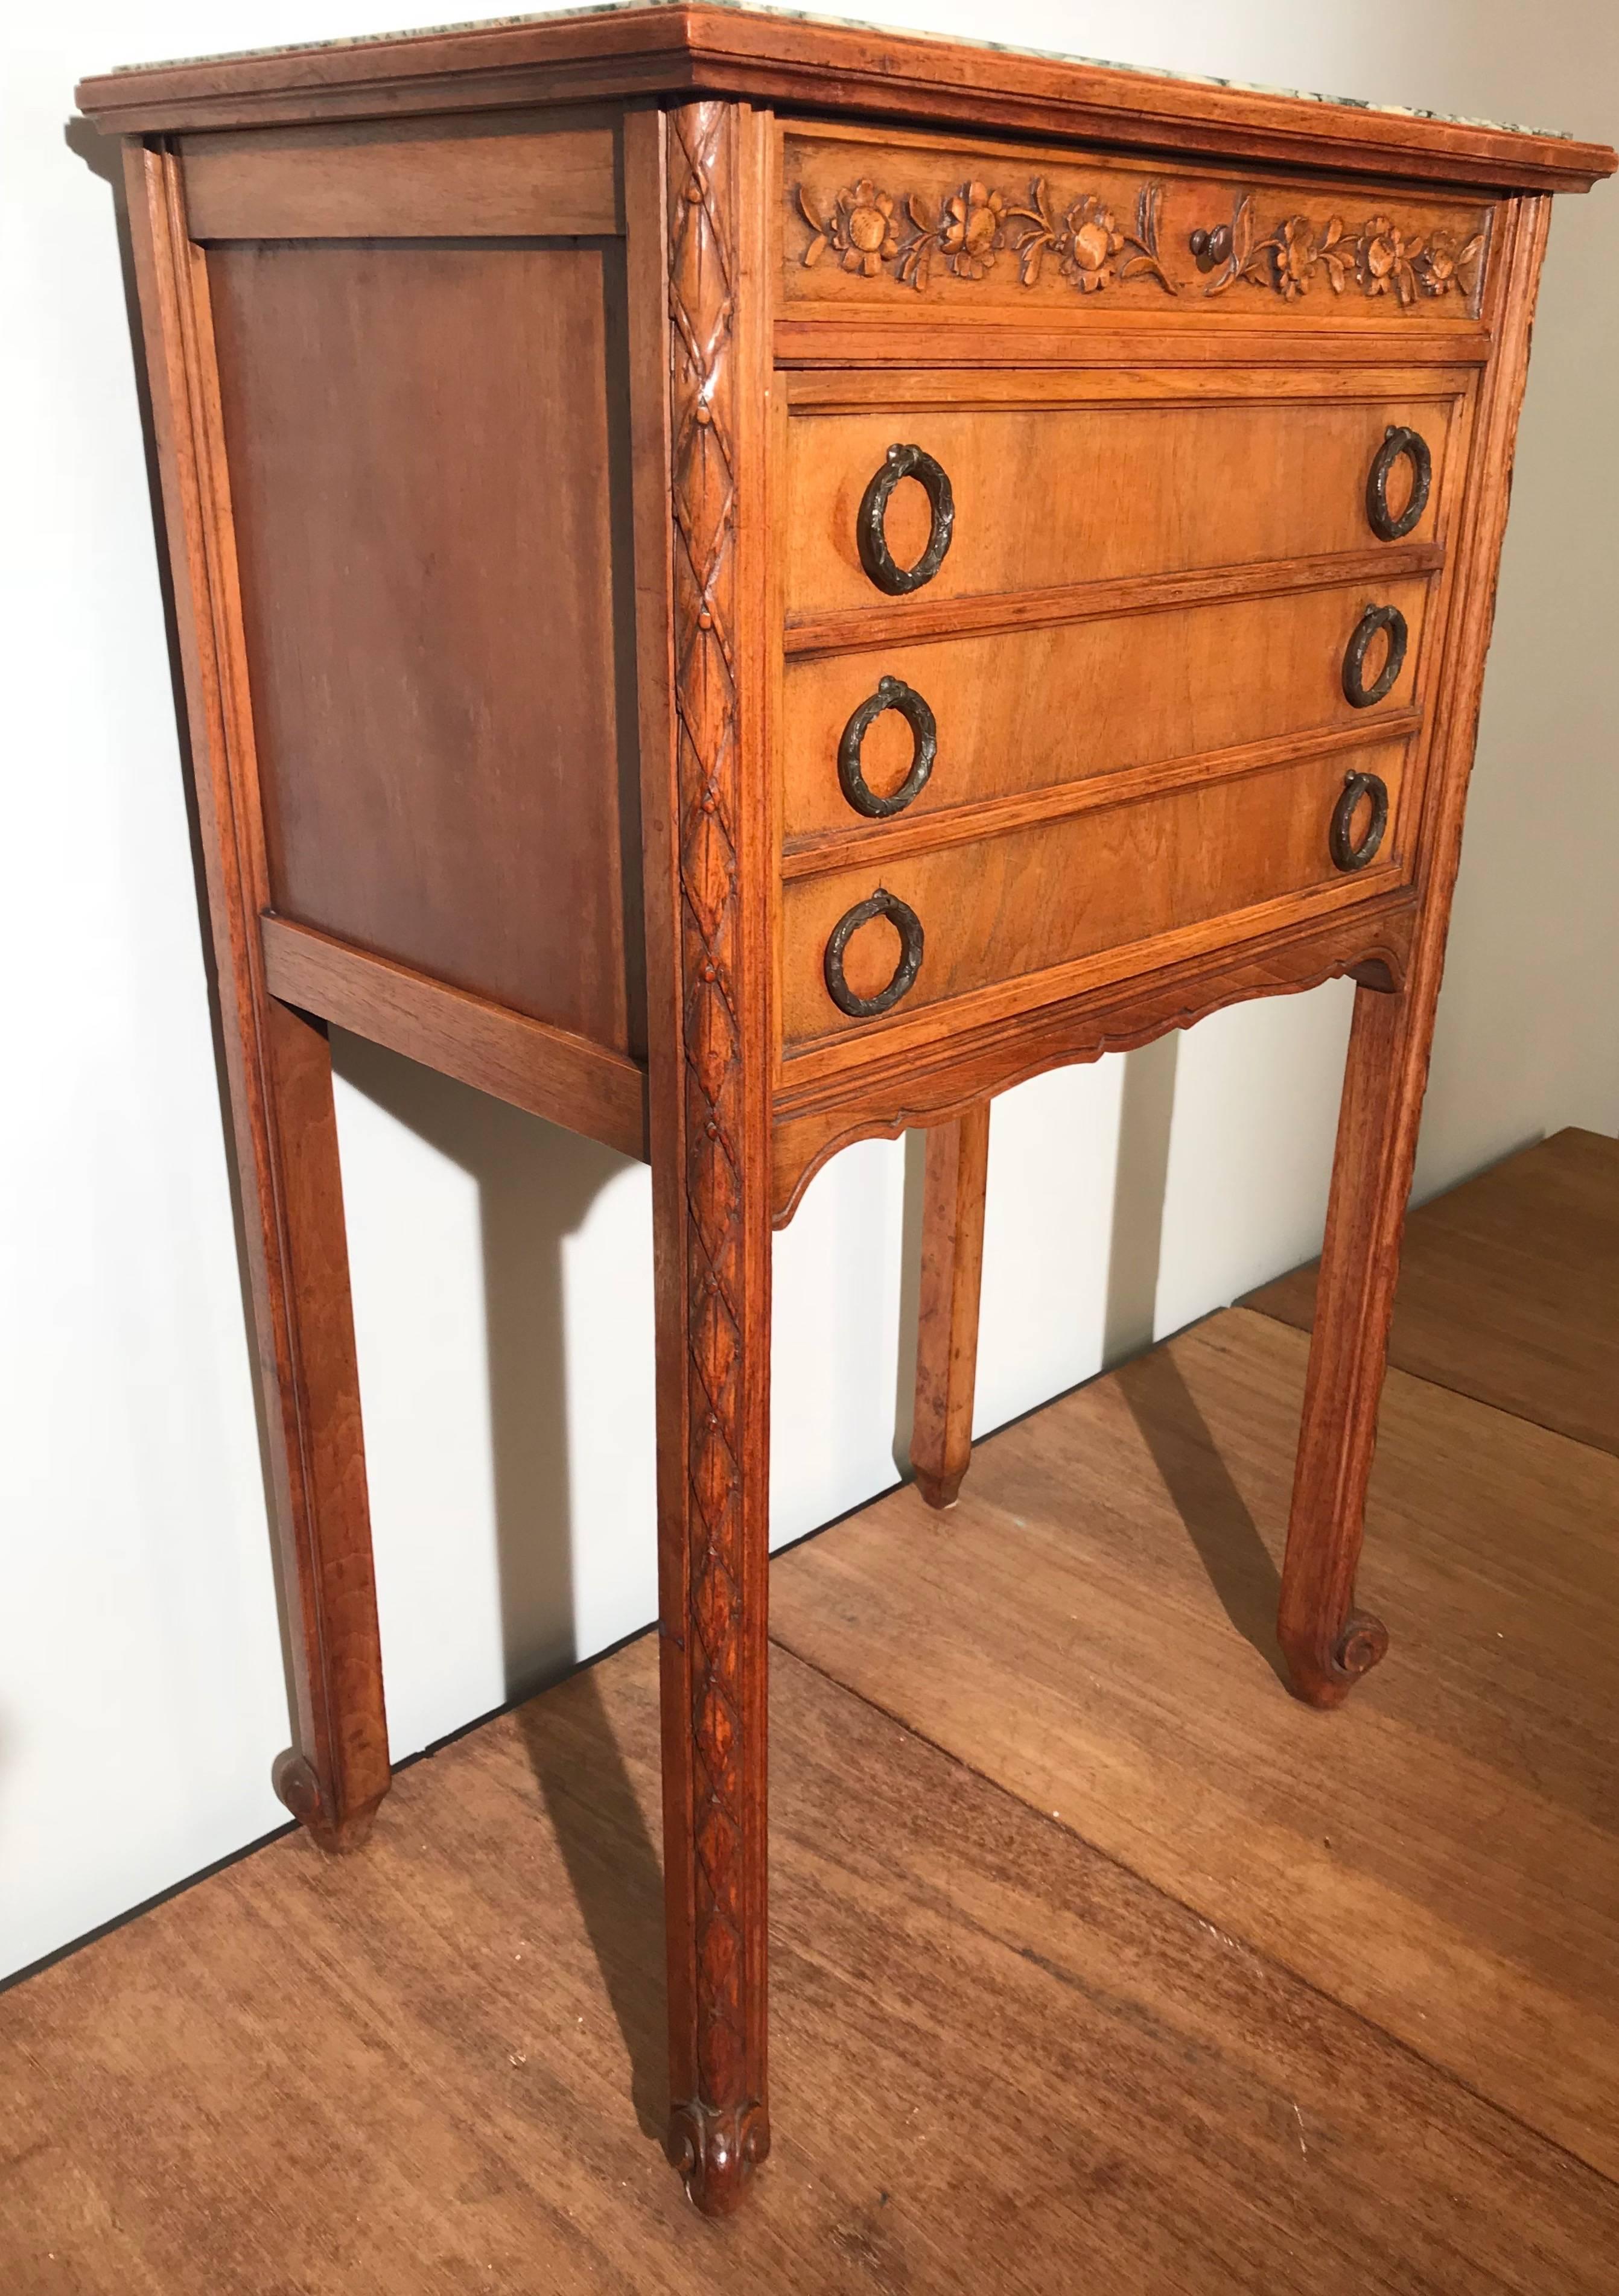 Rare, practical and beautiful quality antique cabinet or side table.

This early 1900s, practical size cabinet can be used for all kinds of purposes and in different kinds of interiors. This truly is a very interesting and artistically designed